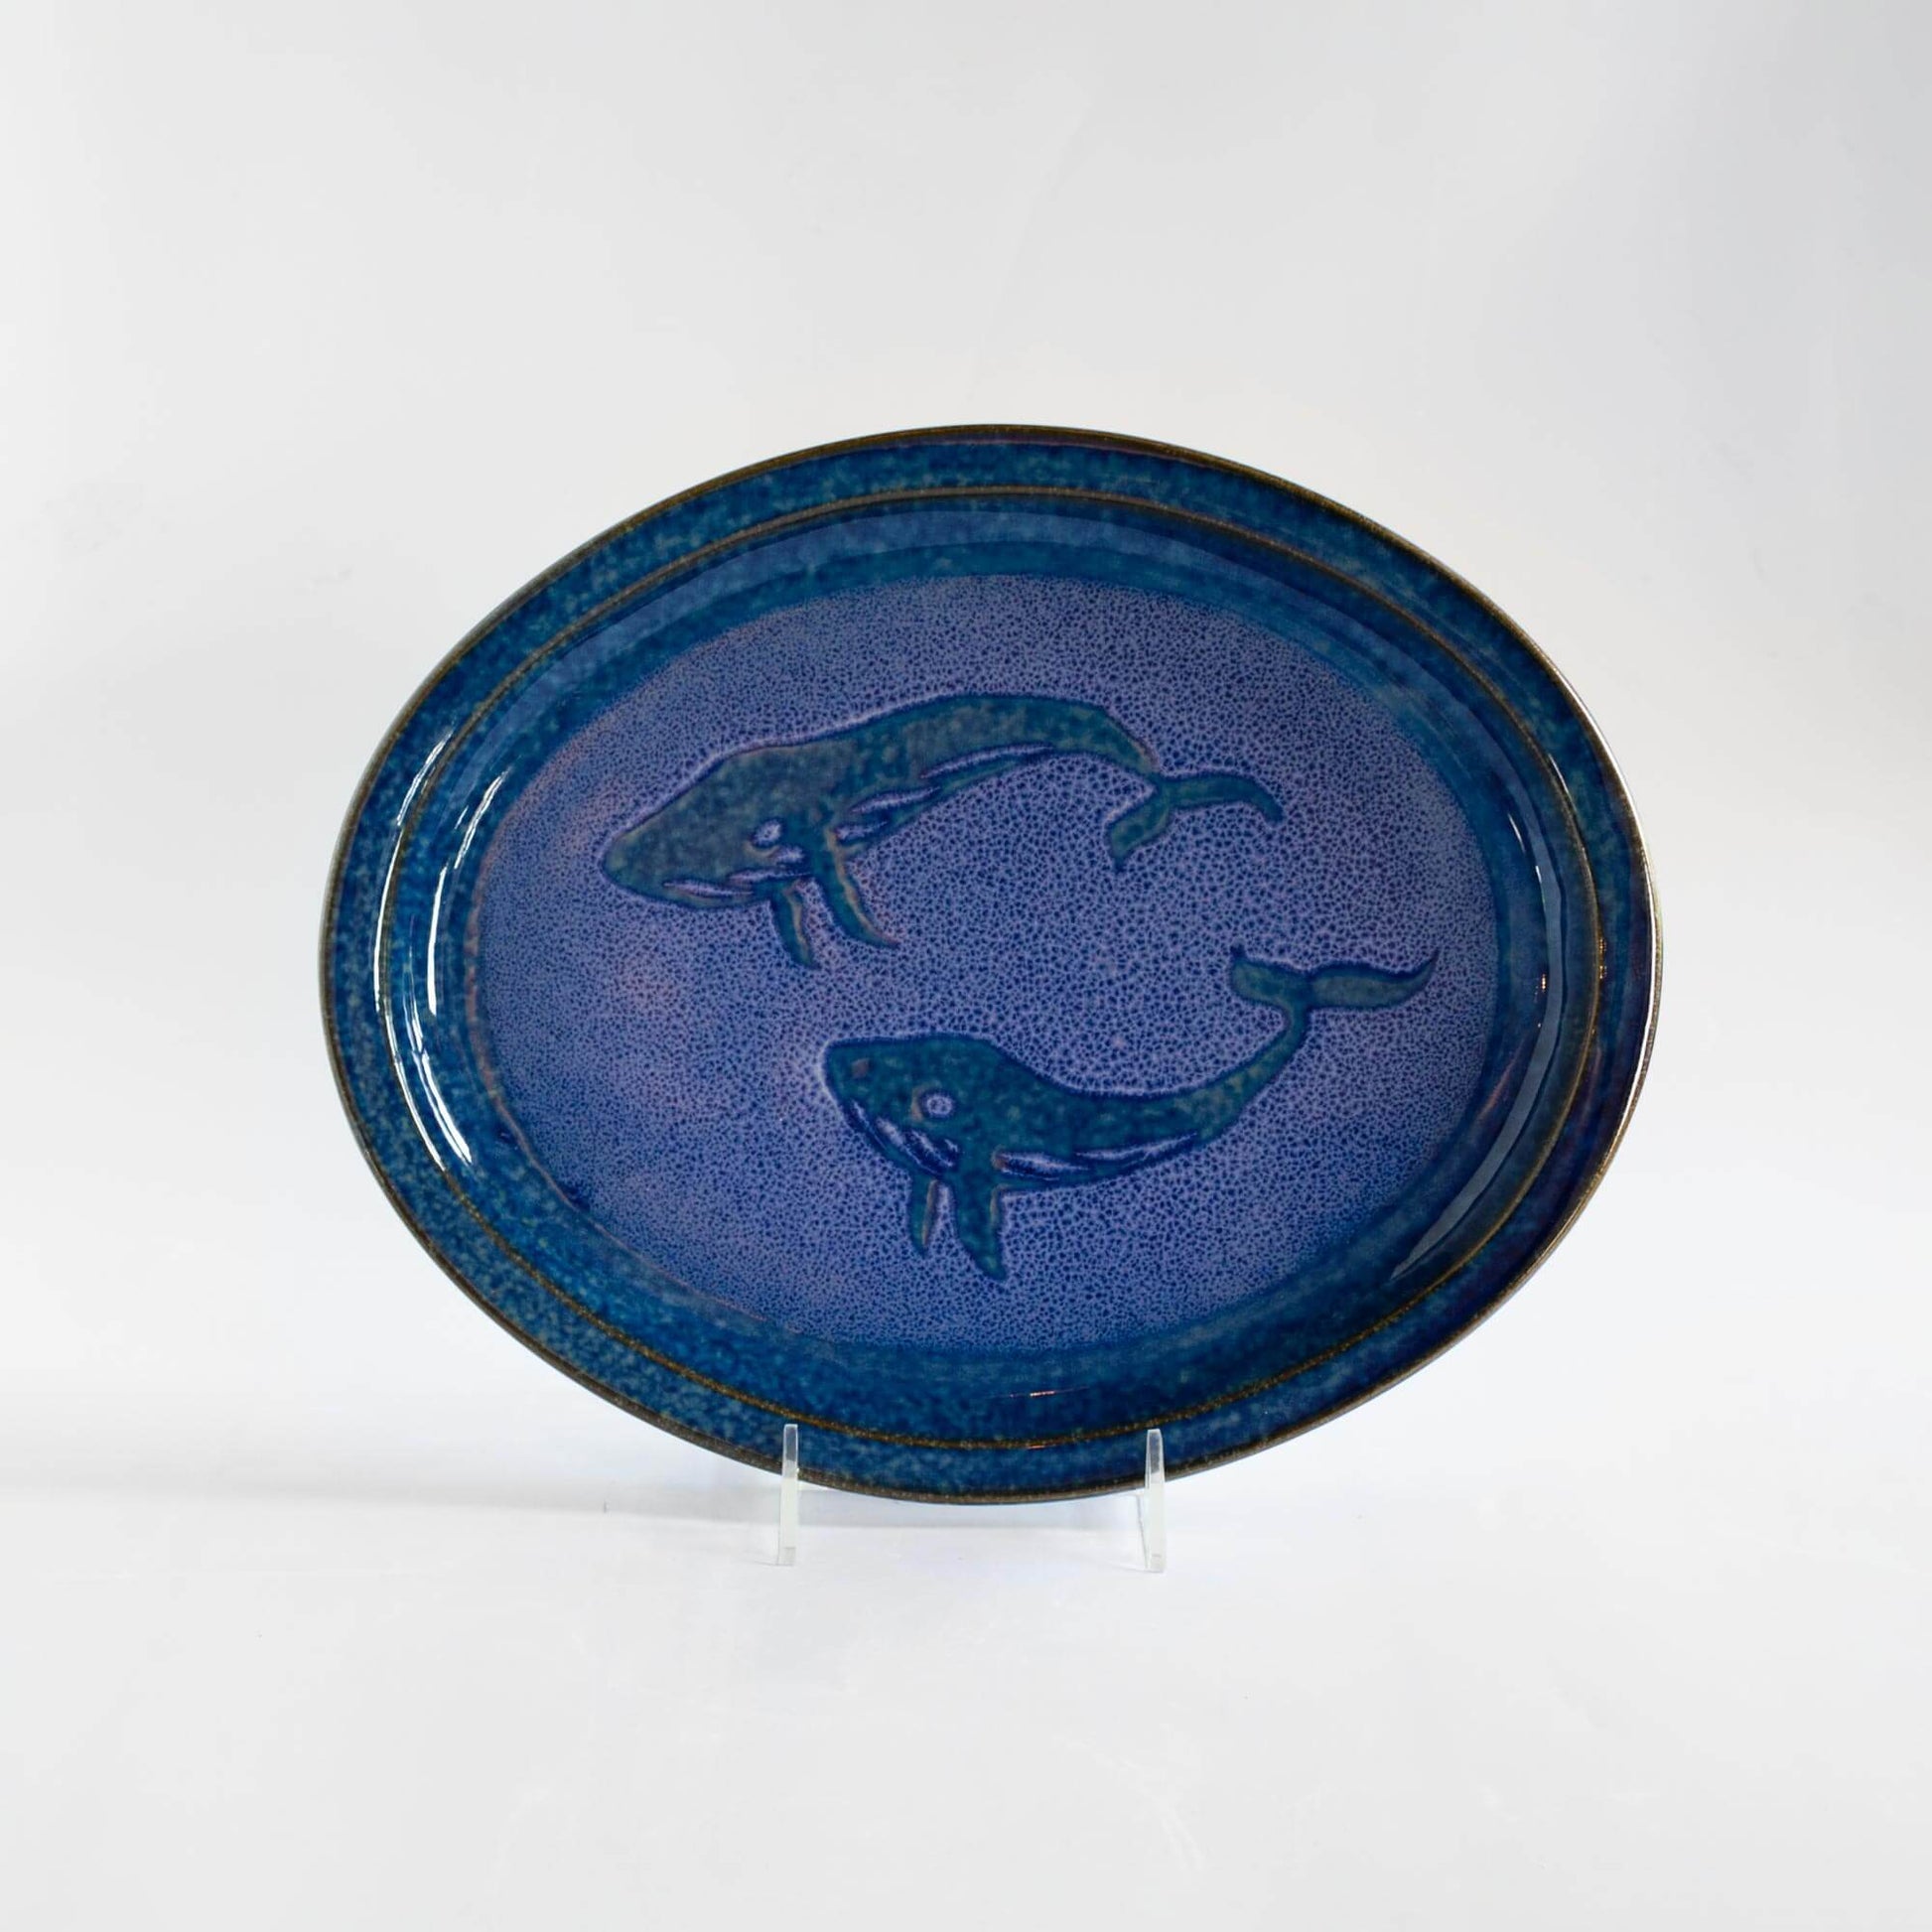 Handmade Pottery Oval Platter in Blue Whale pattern made by Georgetown Pottery in Maine